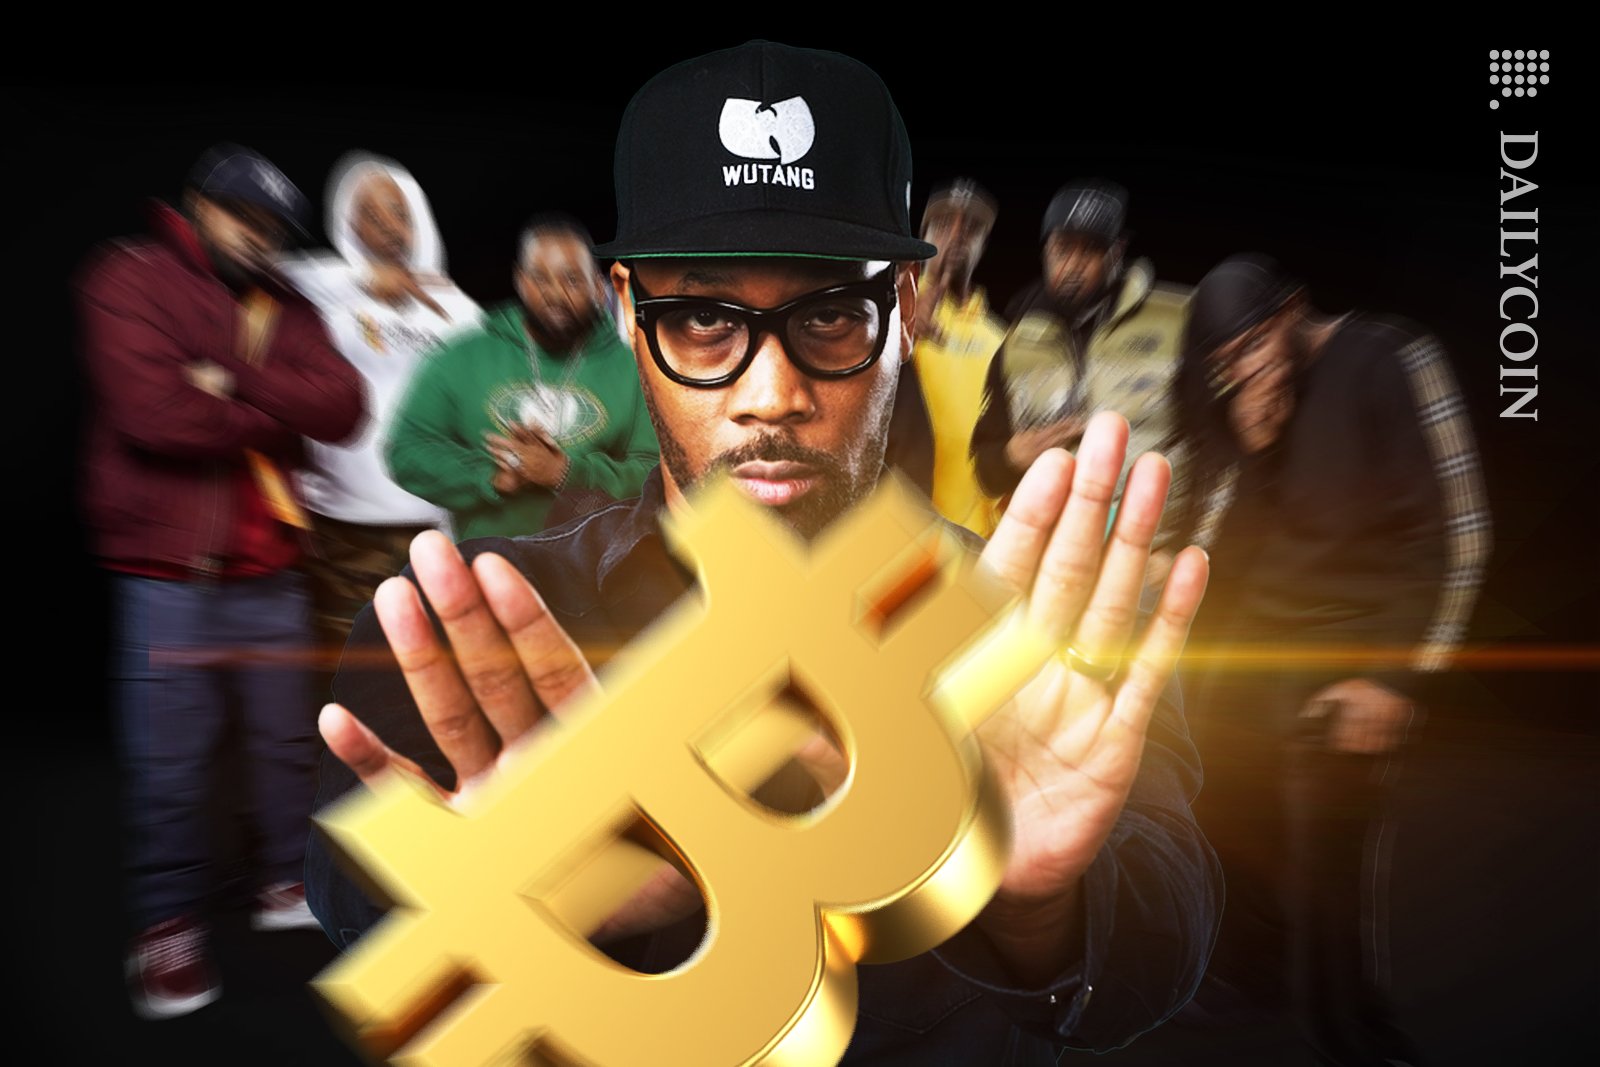 RZA of Wu Tang showing their groups hand symbol using a Bitcoin force.